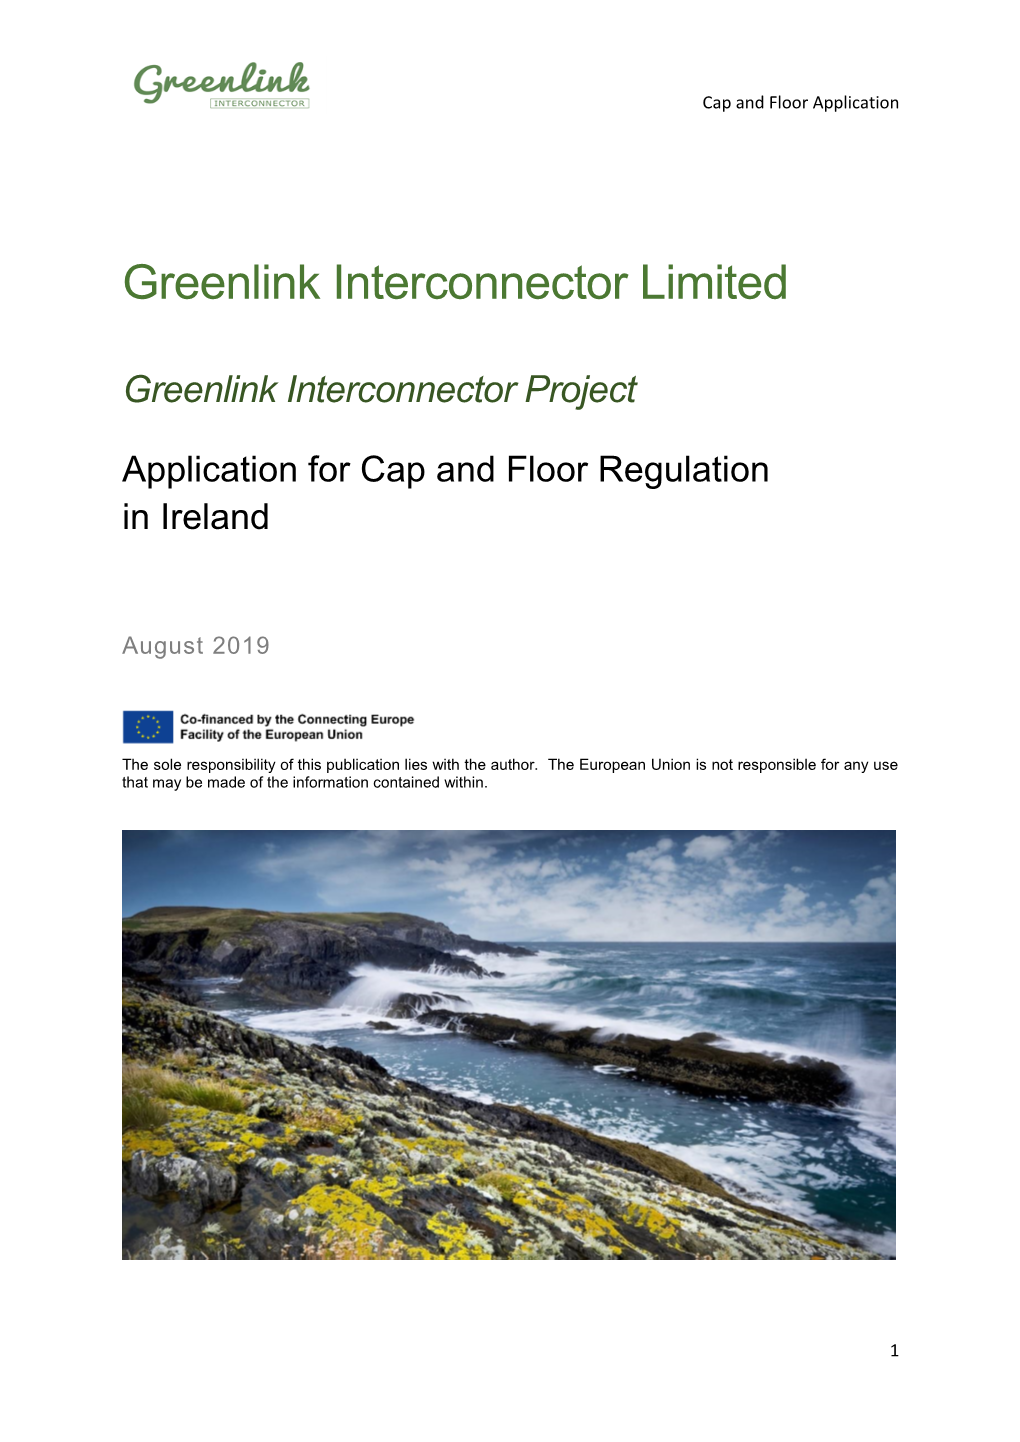 Greenlink Interconnector Limited